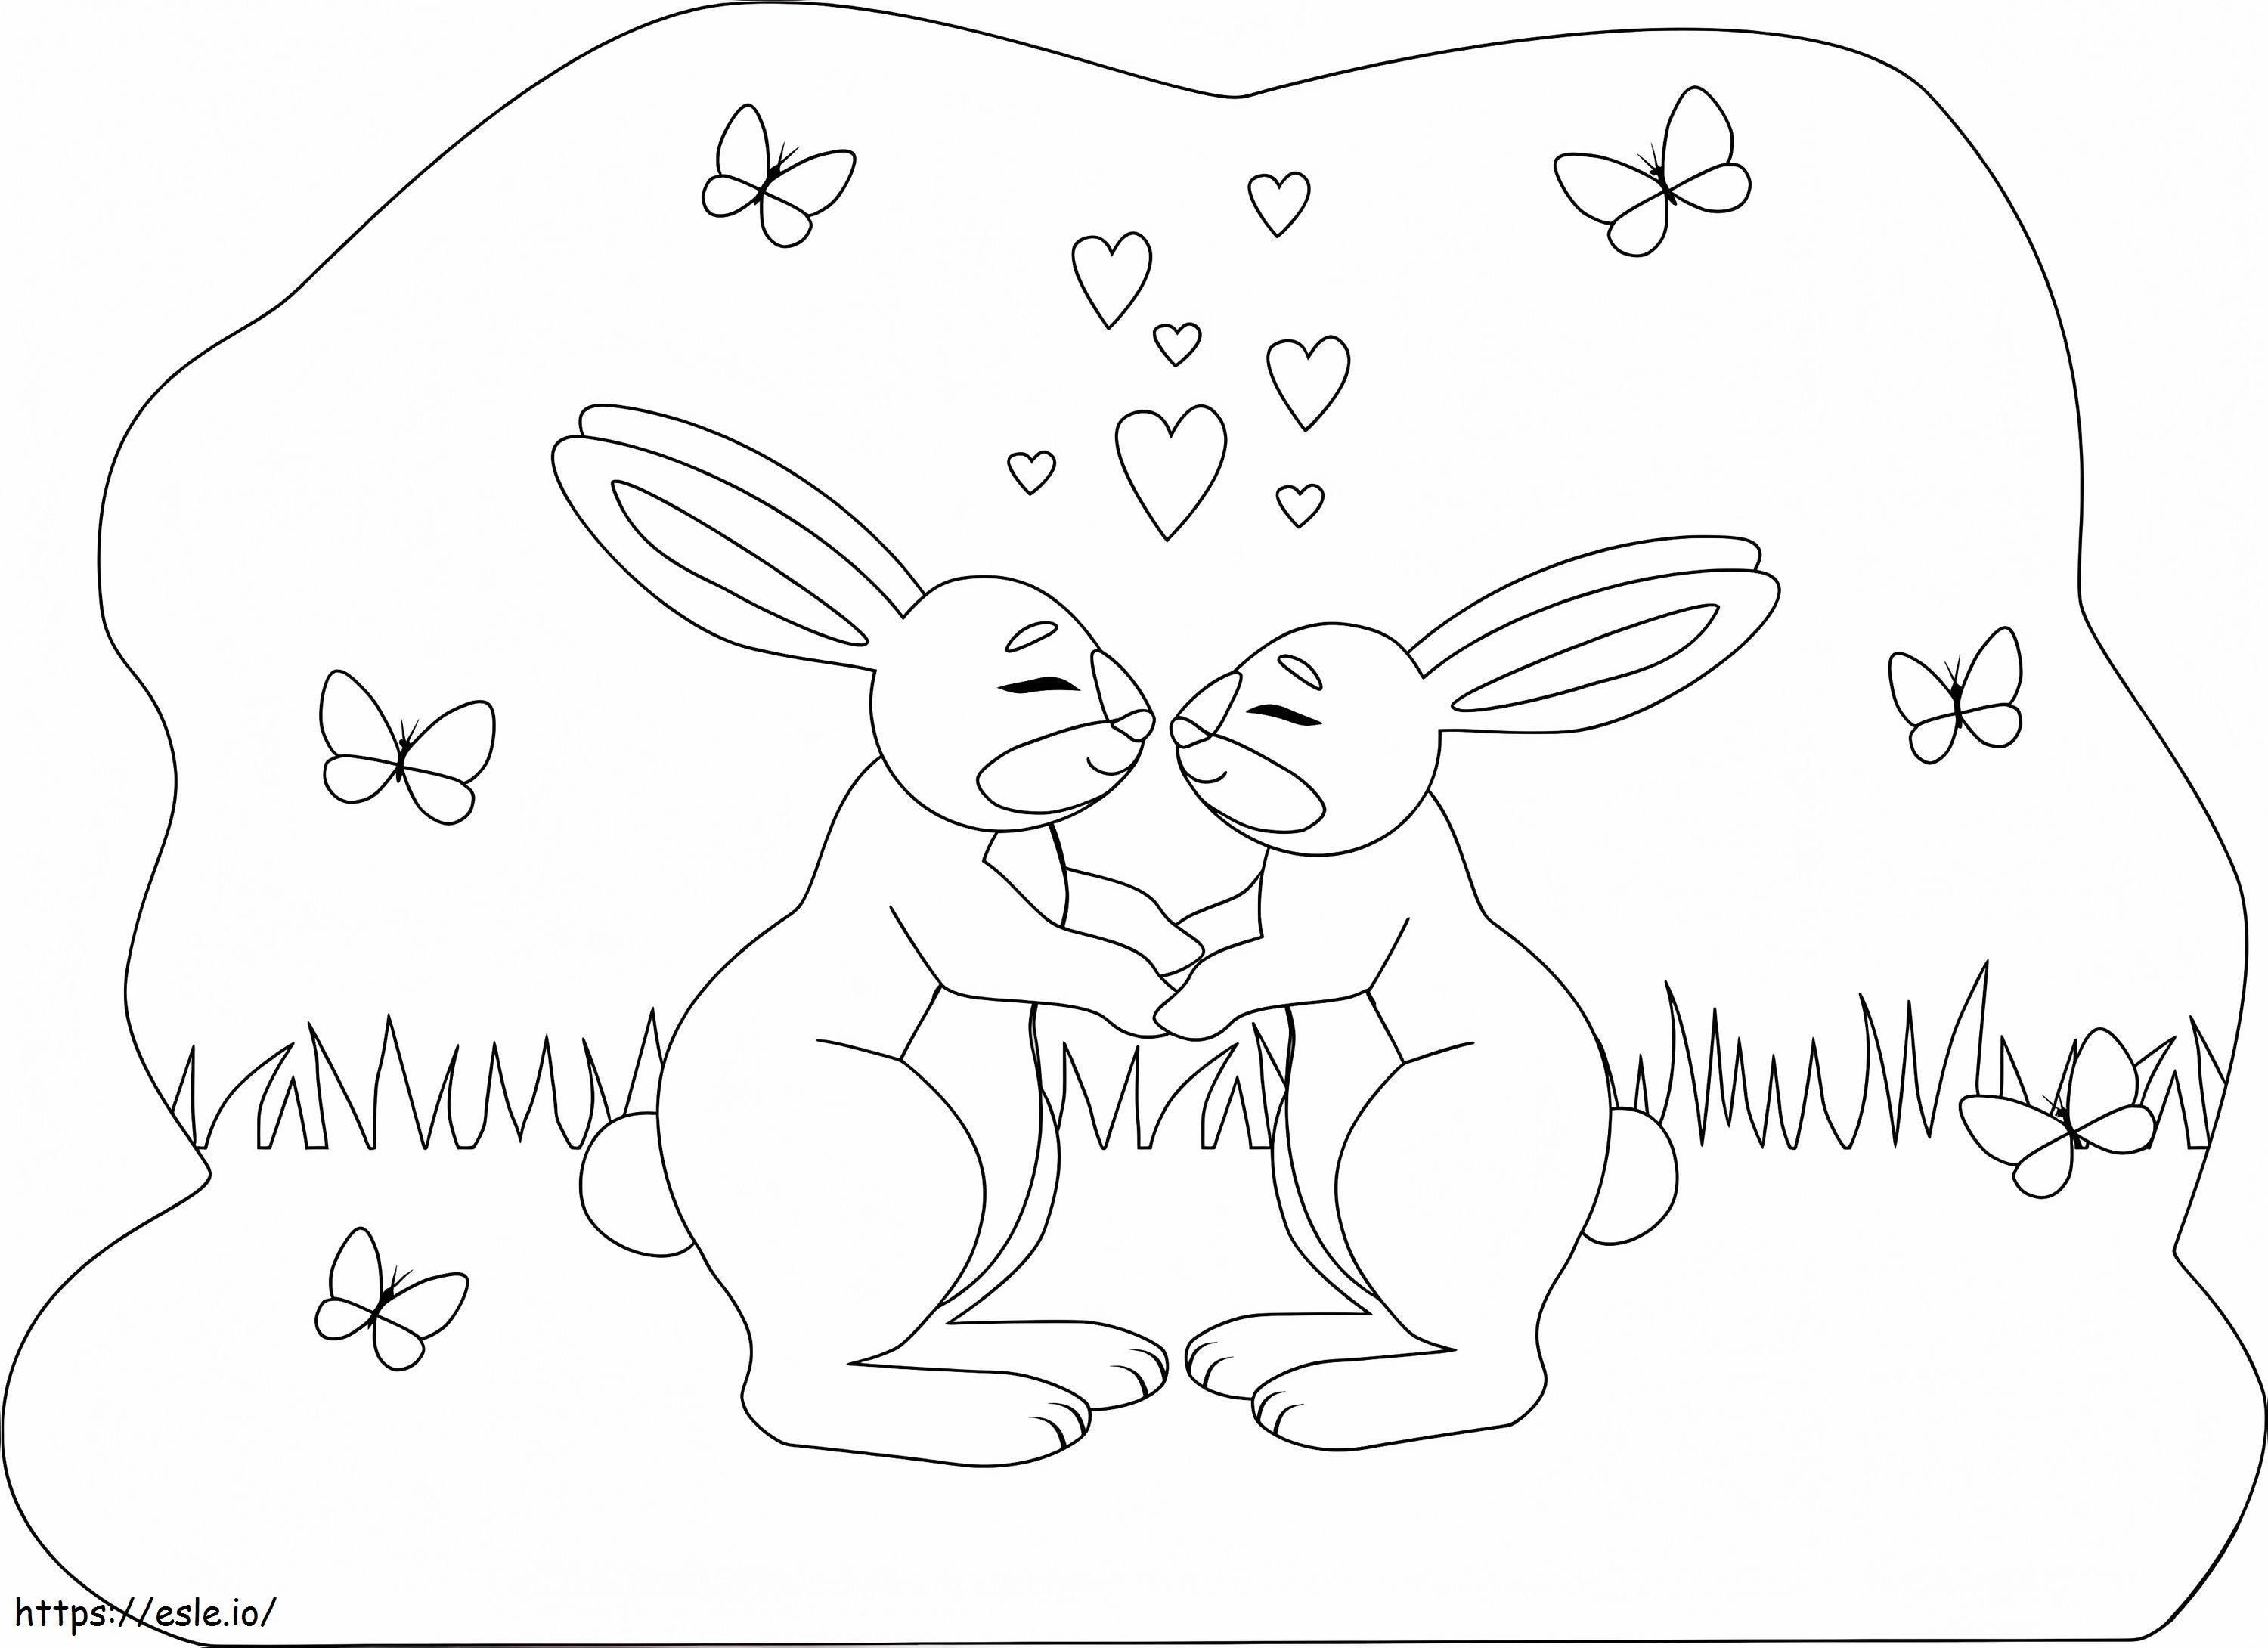 Rabbits In Love coloring page